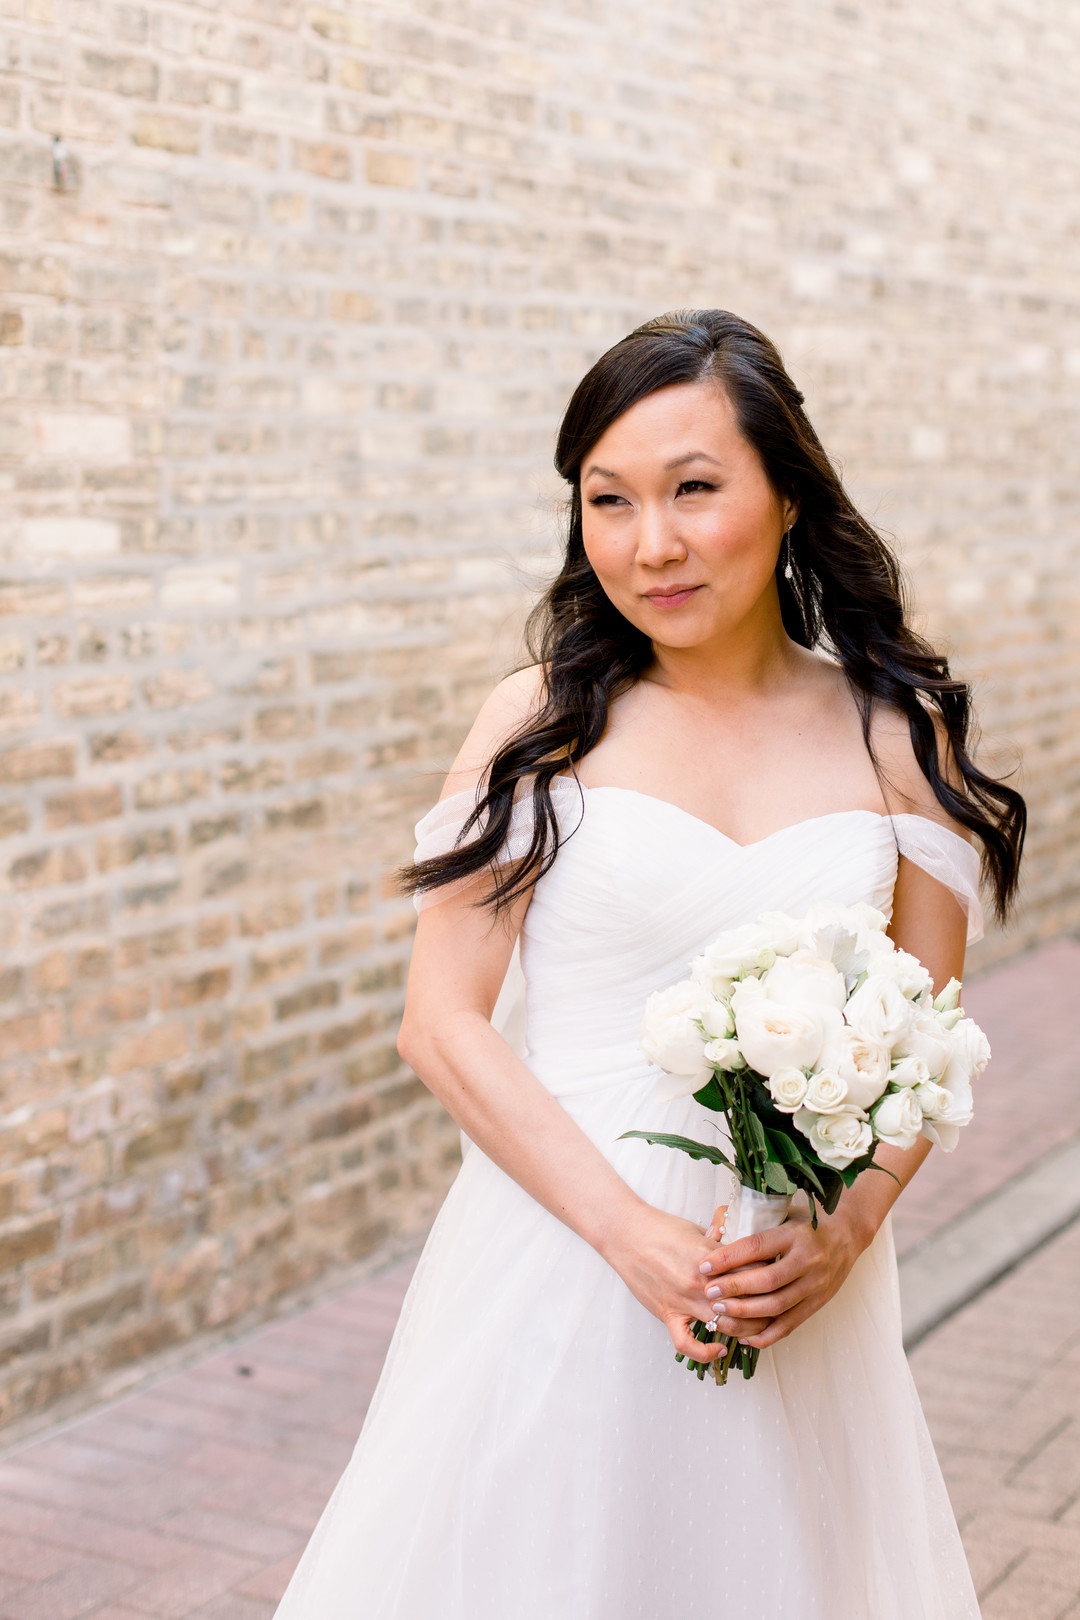 Bridal portrait: Spring wedding inspiration captured by Nicole Morisco Photography. Find more spring wedding ideas at CHItheeWED.com!